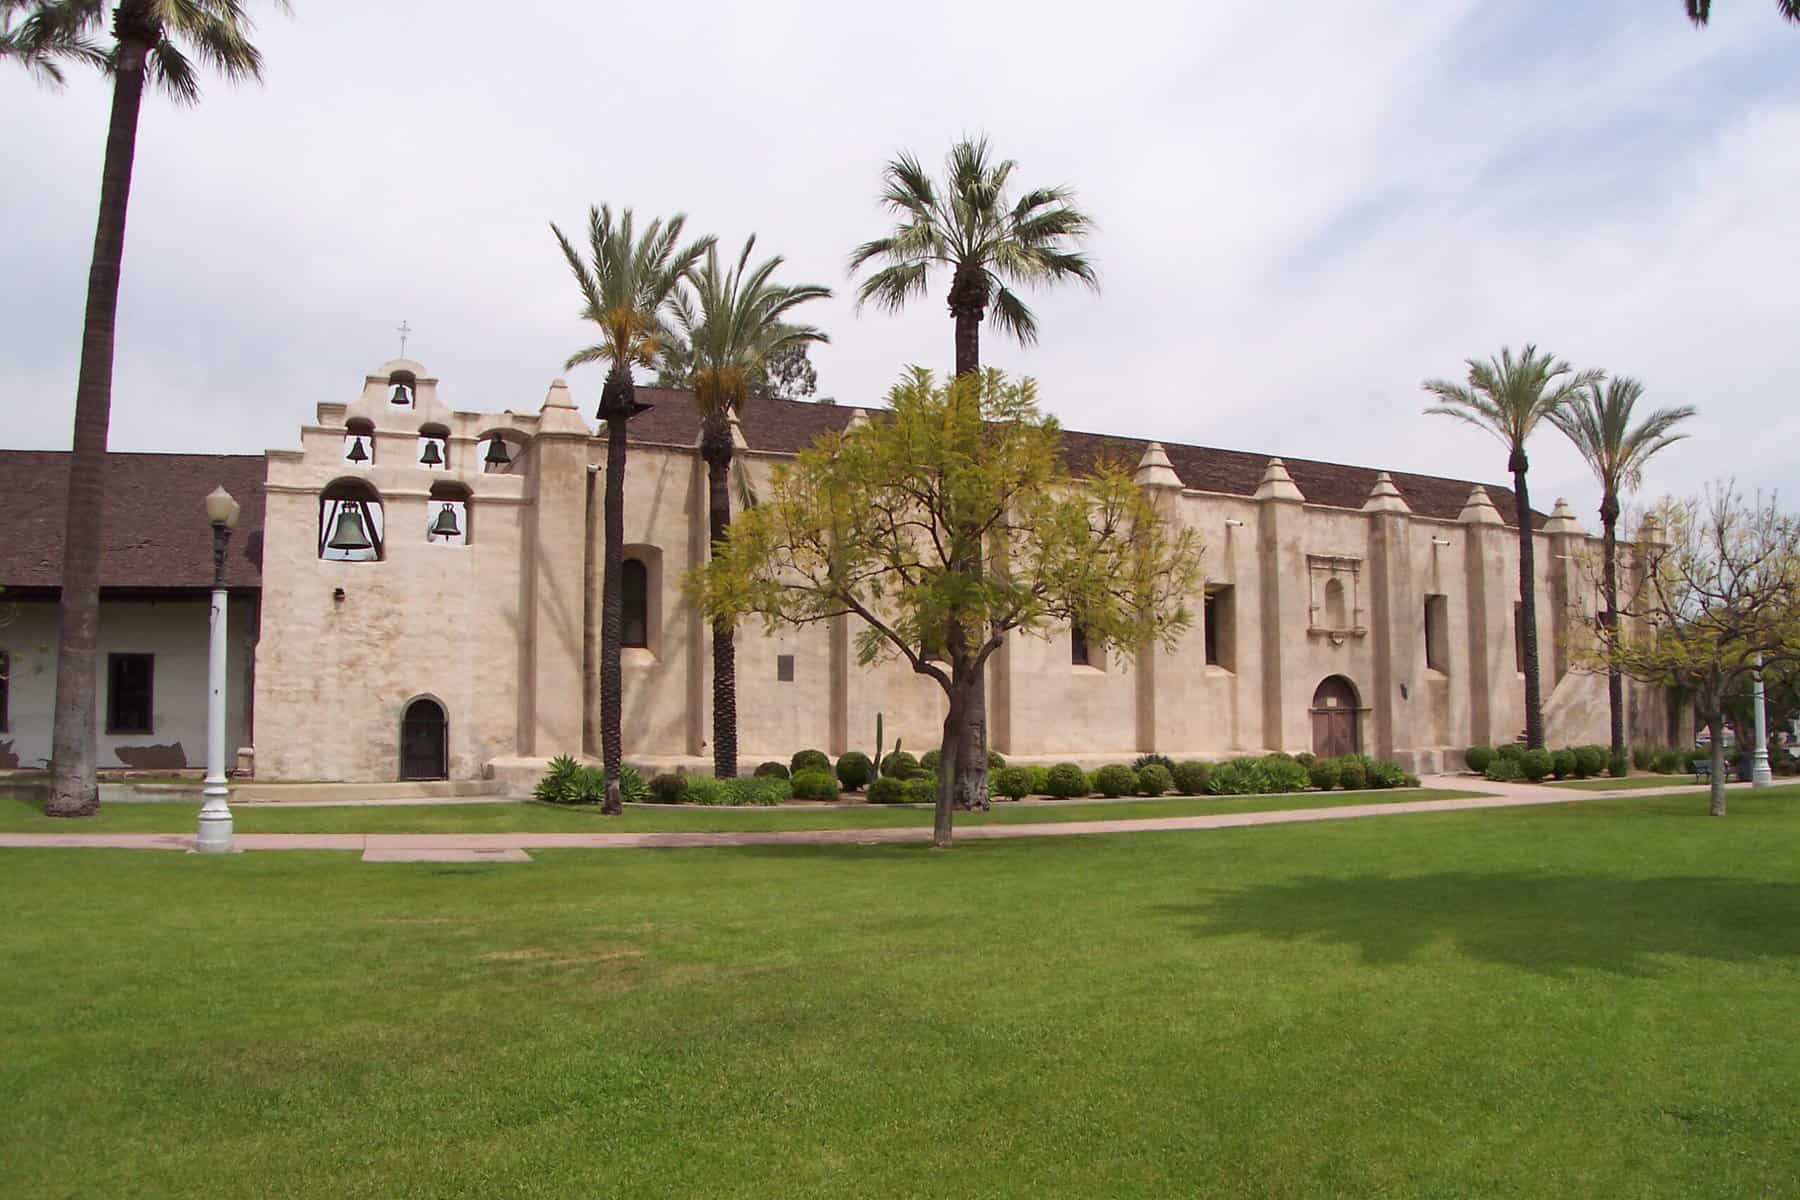 Mission San Gabriel in California is shown from across the grass.